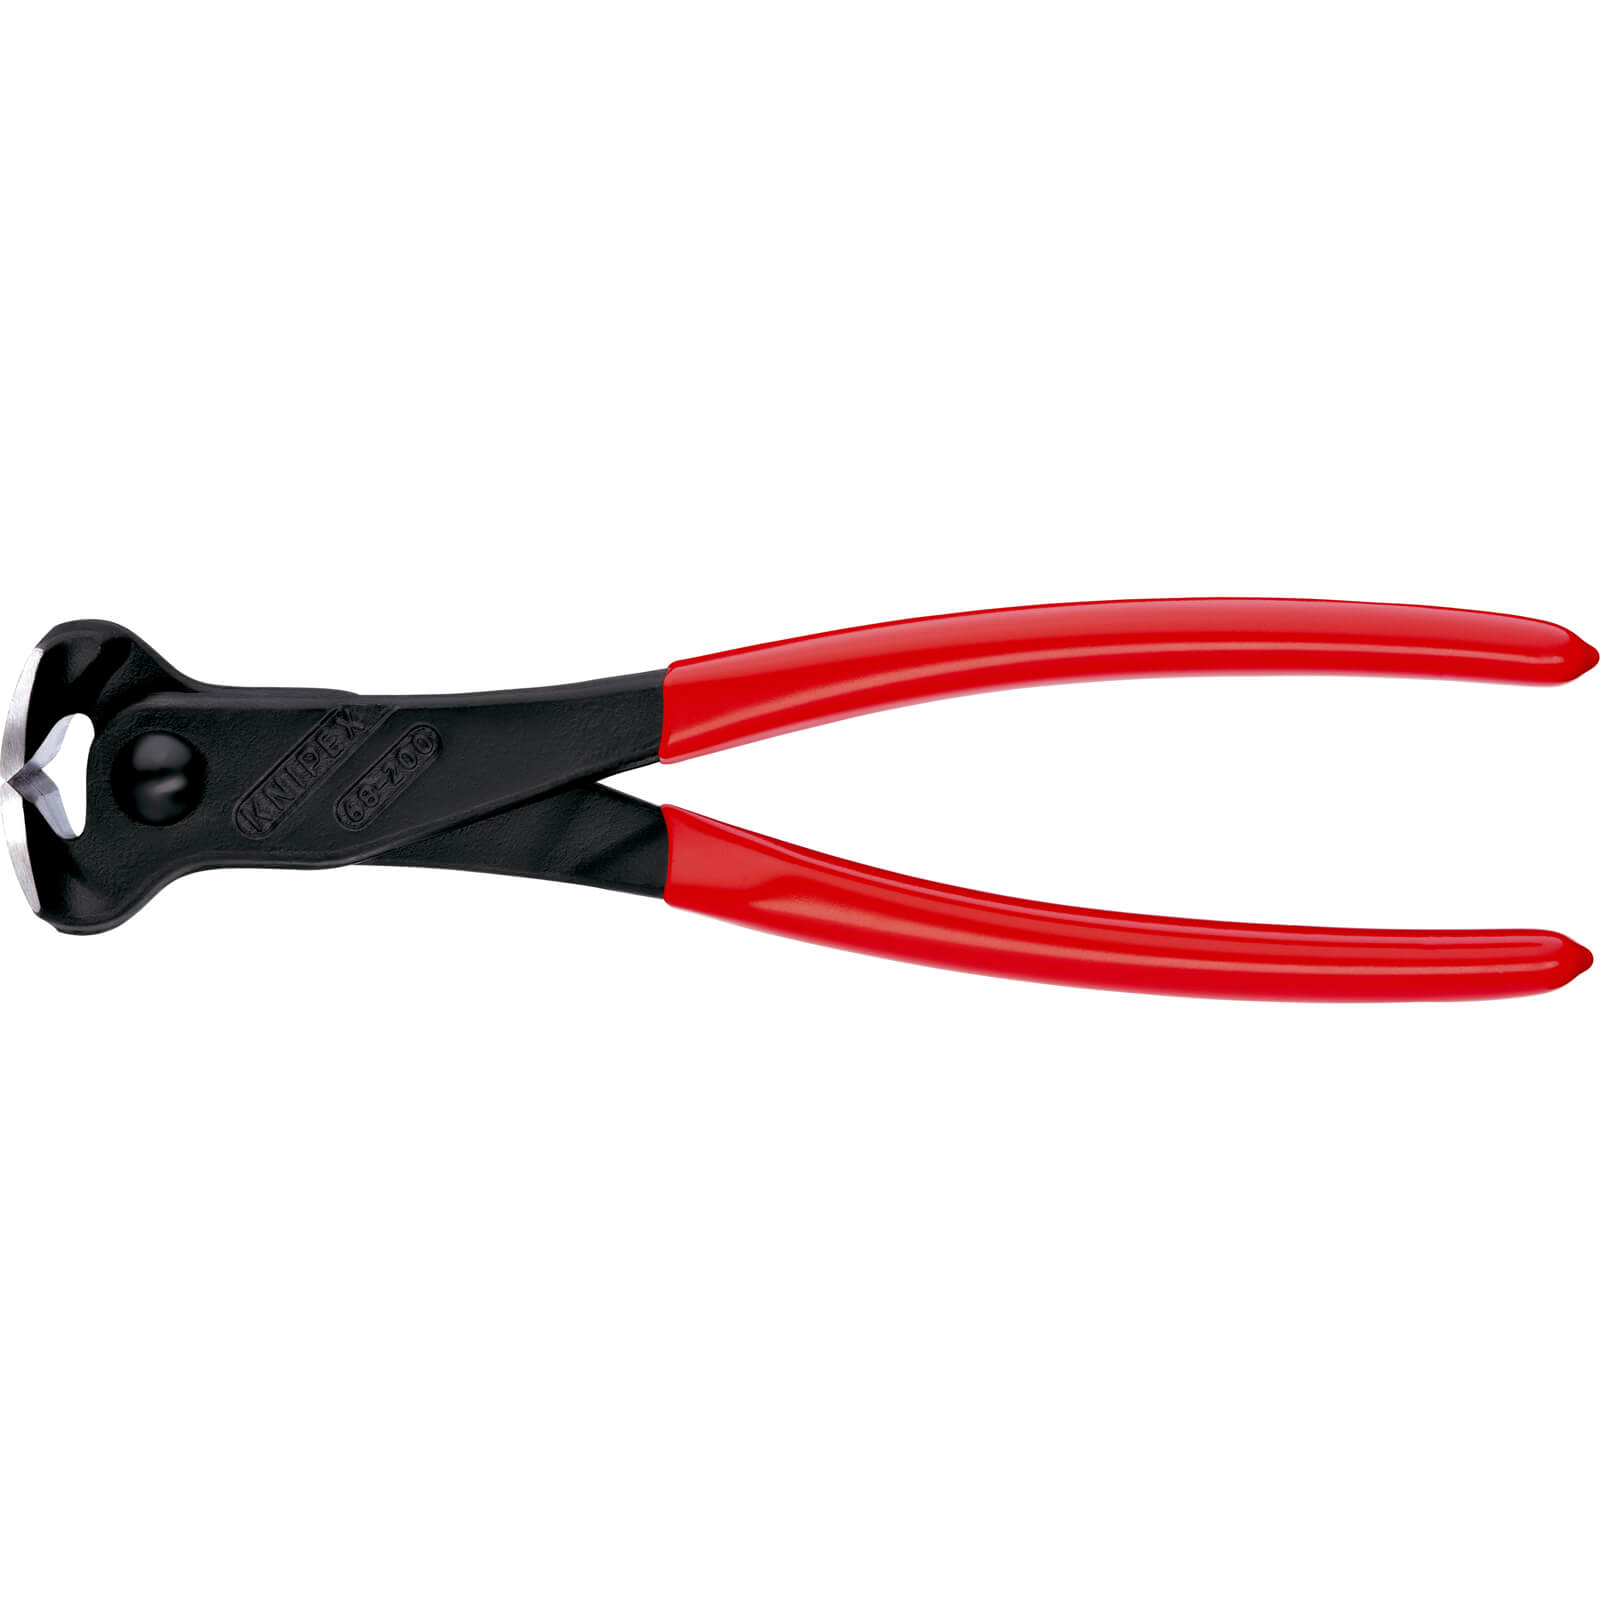 Image of Knipex 68 01 Steel Rebar Fixers Concrete End Cutting Pliers 200mm